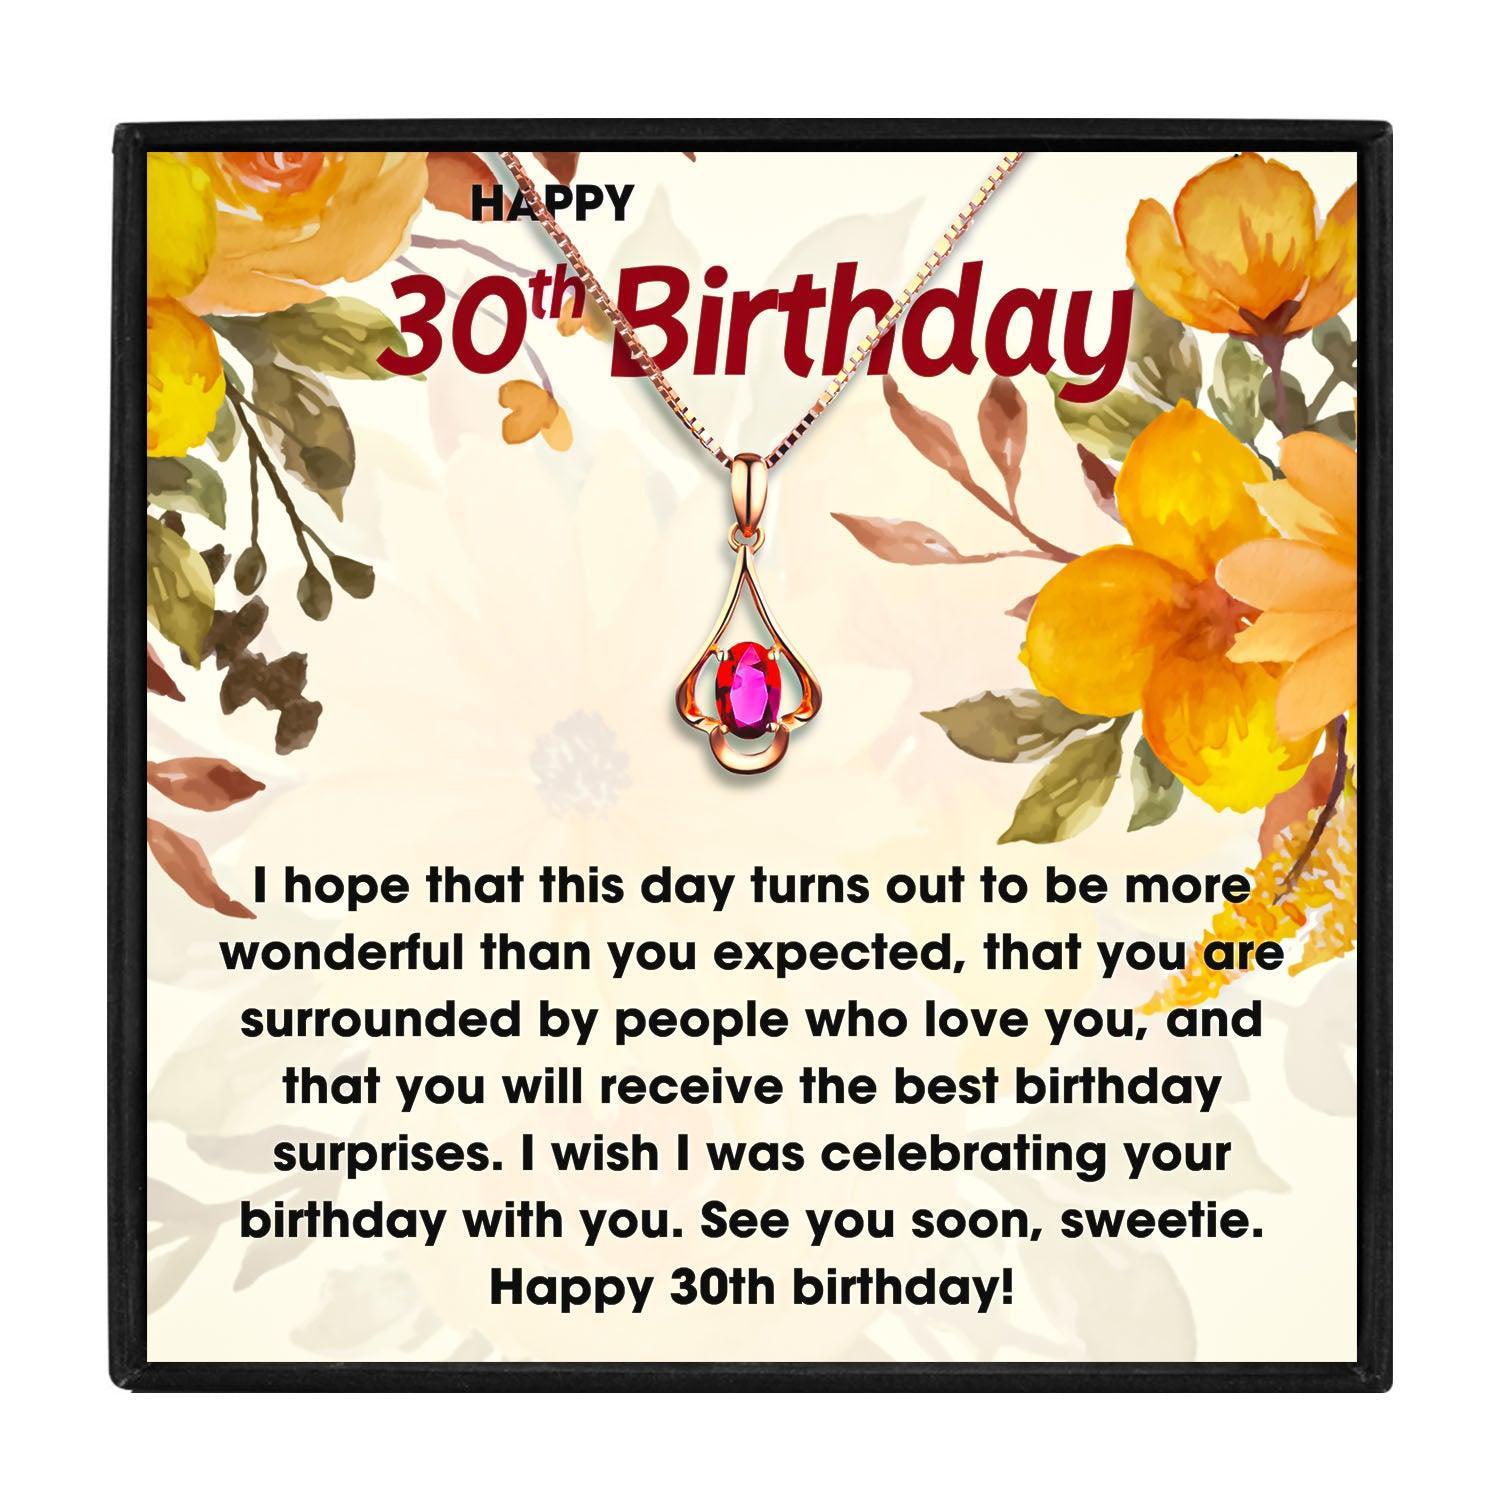 Meaningful 30th Birthday Gifts For Her for Christmas 2023 | Meaningful 30th Birthday Gifts For Her - undefined | 30th birthday gifts for her, 30th birthday ideas for her, 30th birthday presents | From Hunny Life | hunnylife.com